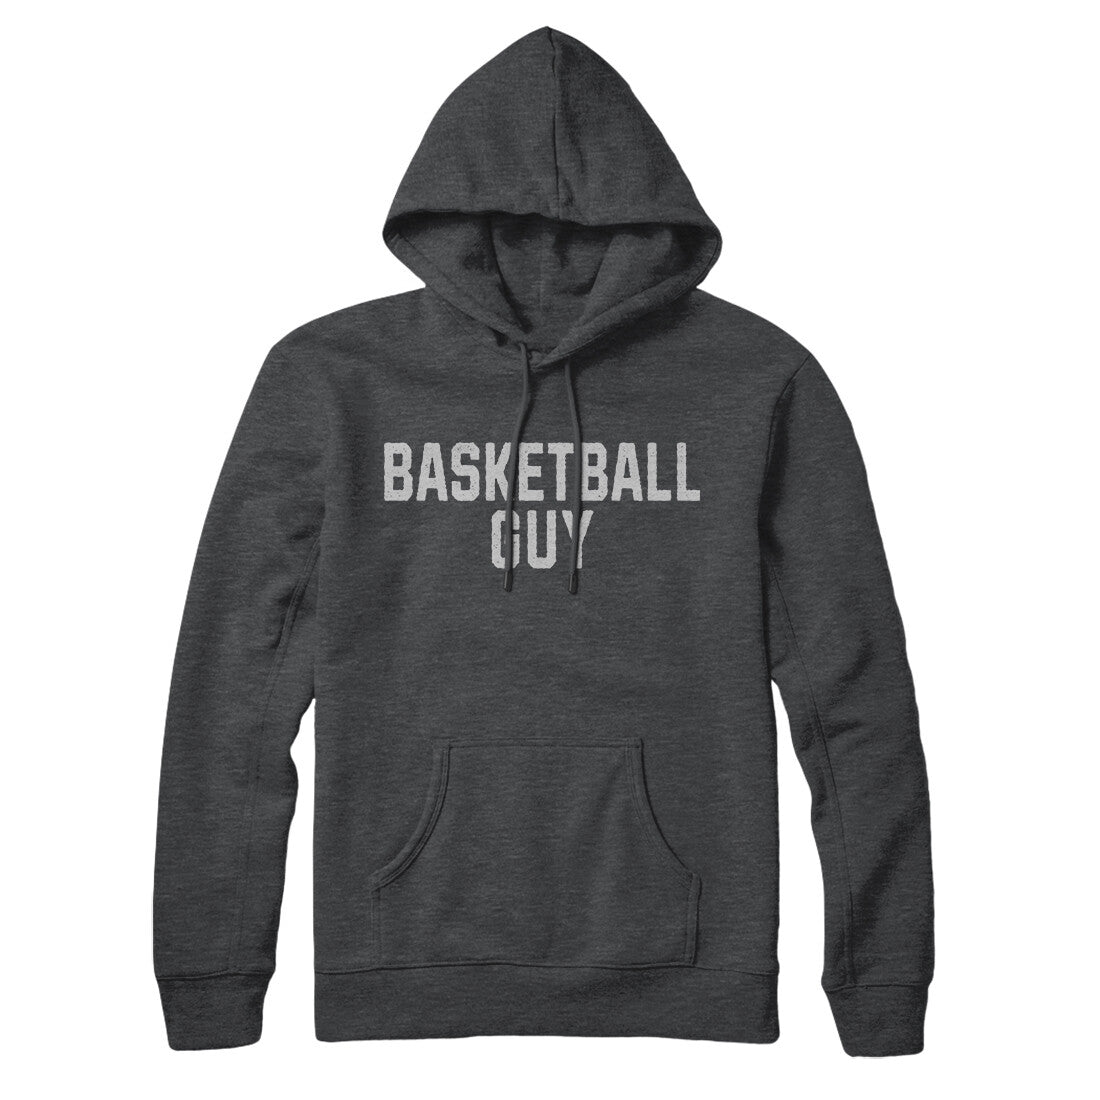 Basketball Guy in Charcoal Heather Color